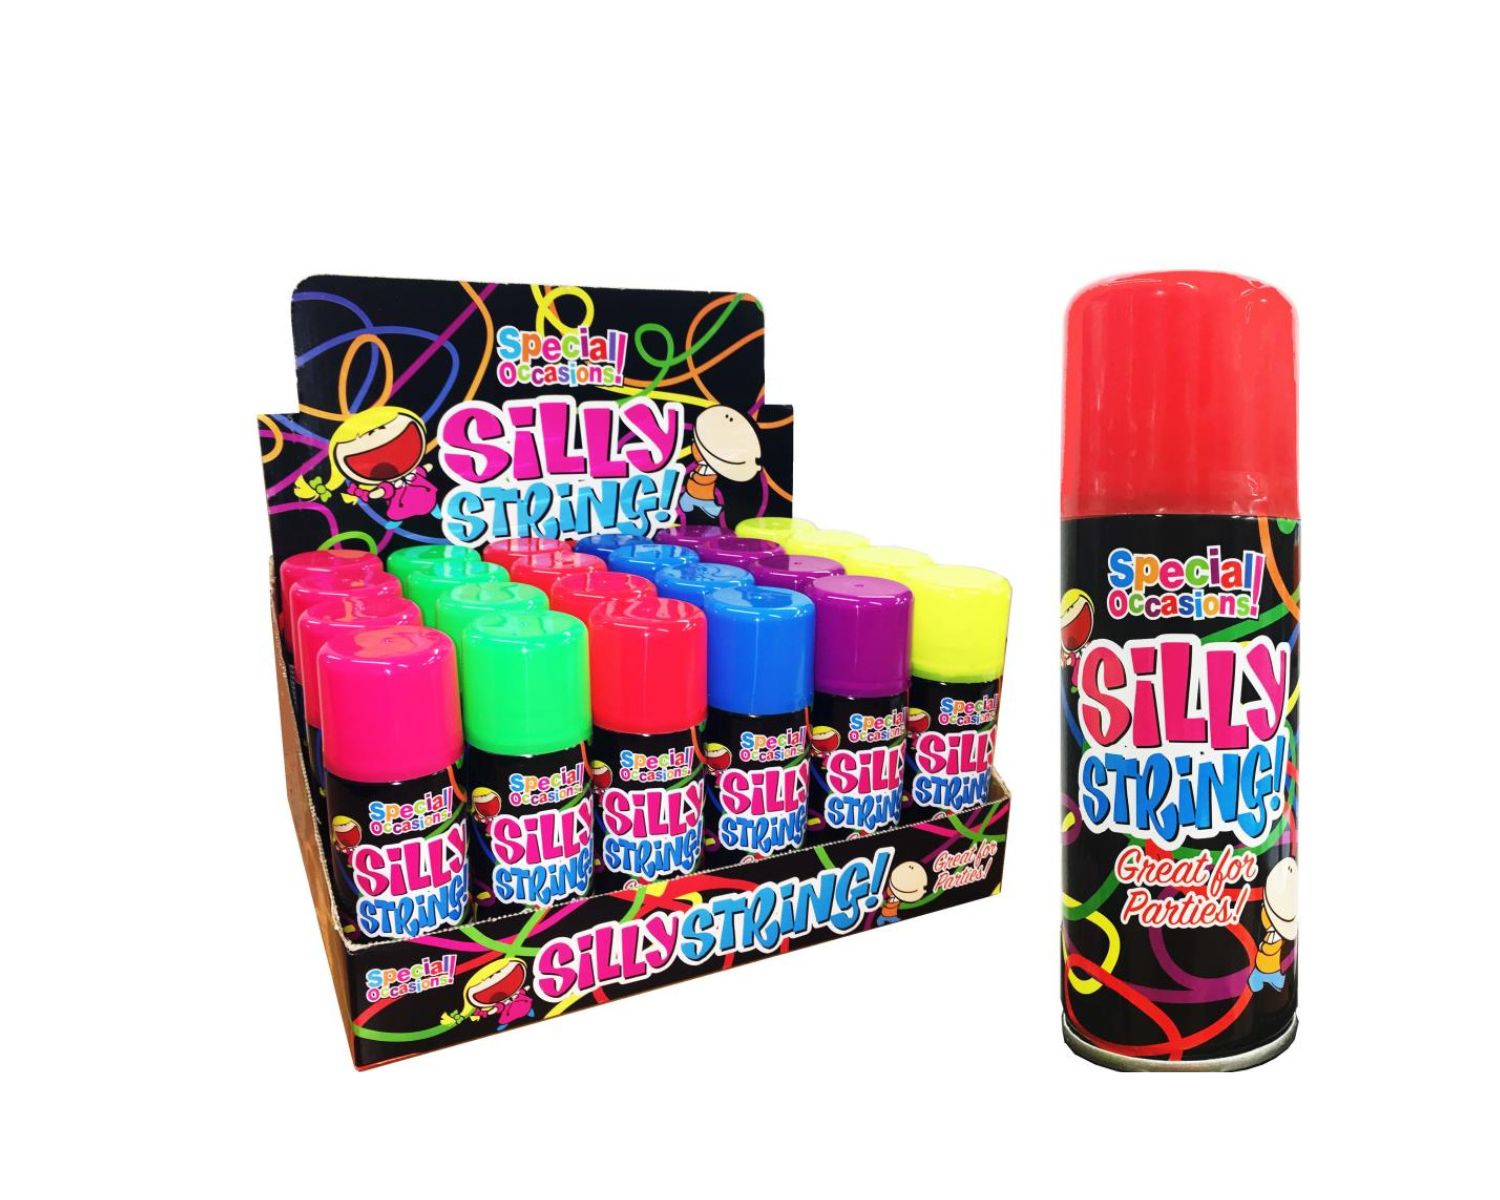 What's Inside Silly String: The Secret's in the Solvent